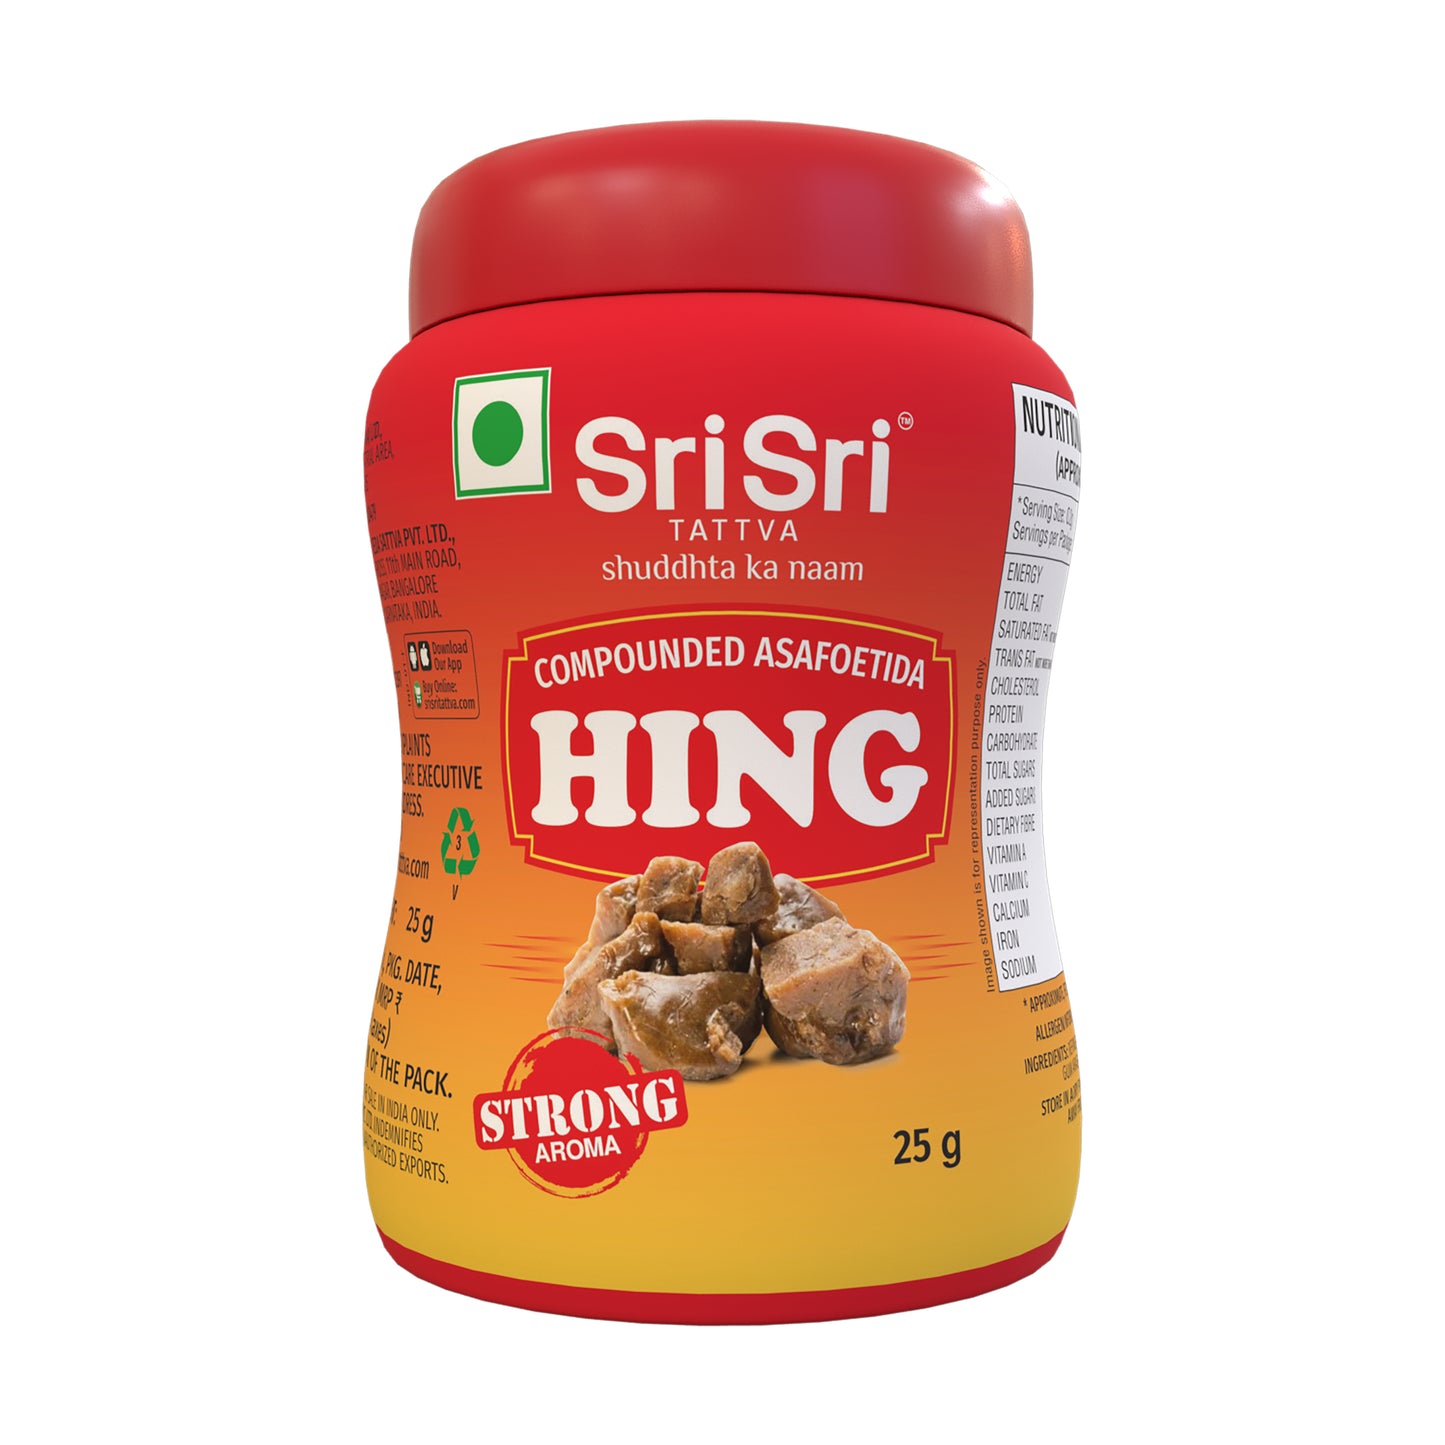 Compounded Asafoetida Hing, 25 g